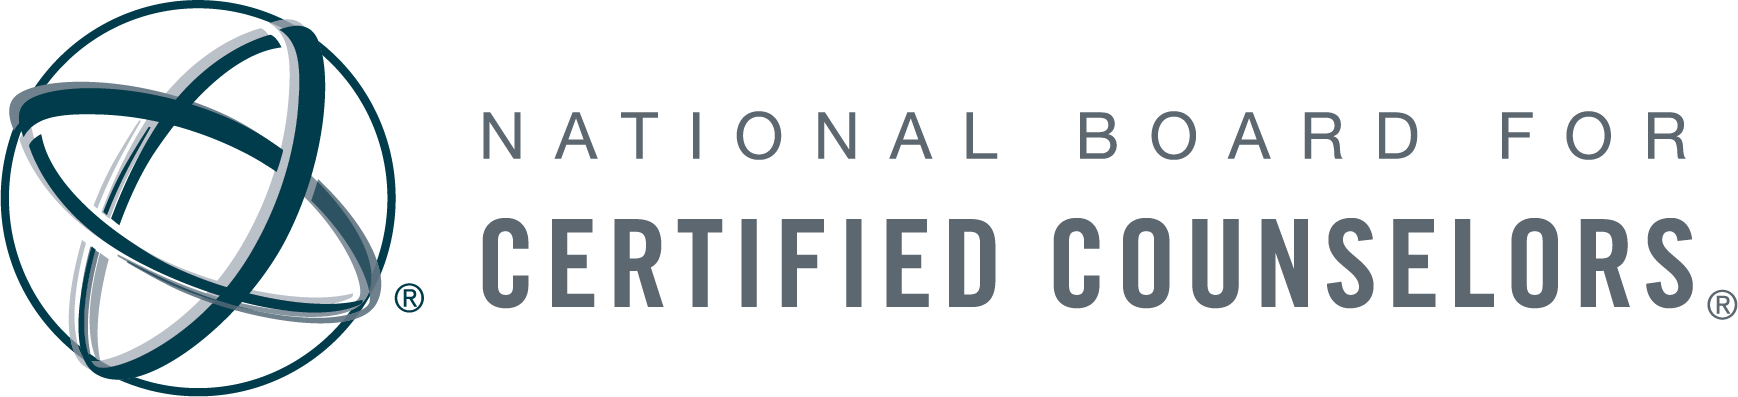 National Board for Certified Counselors Logo